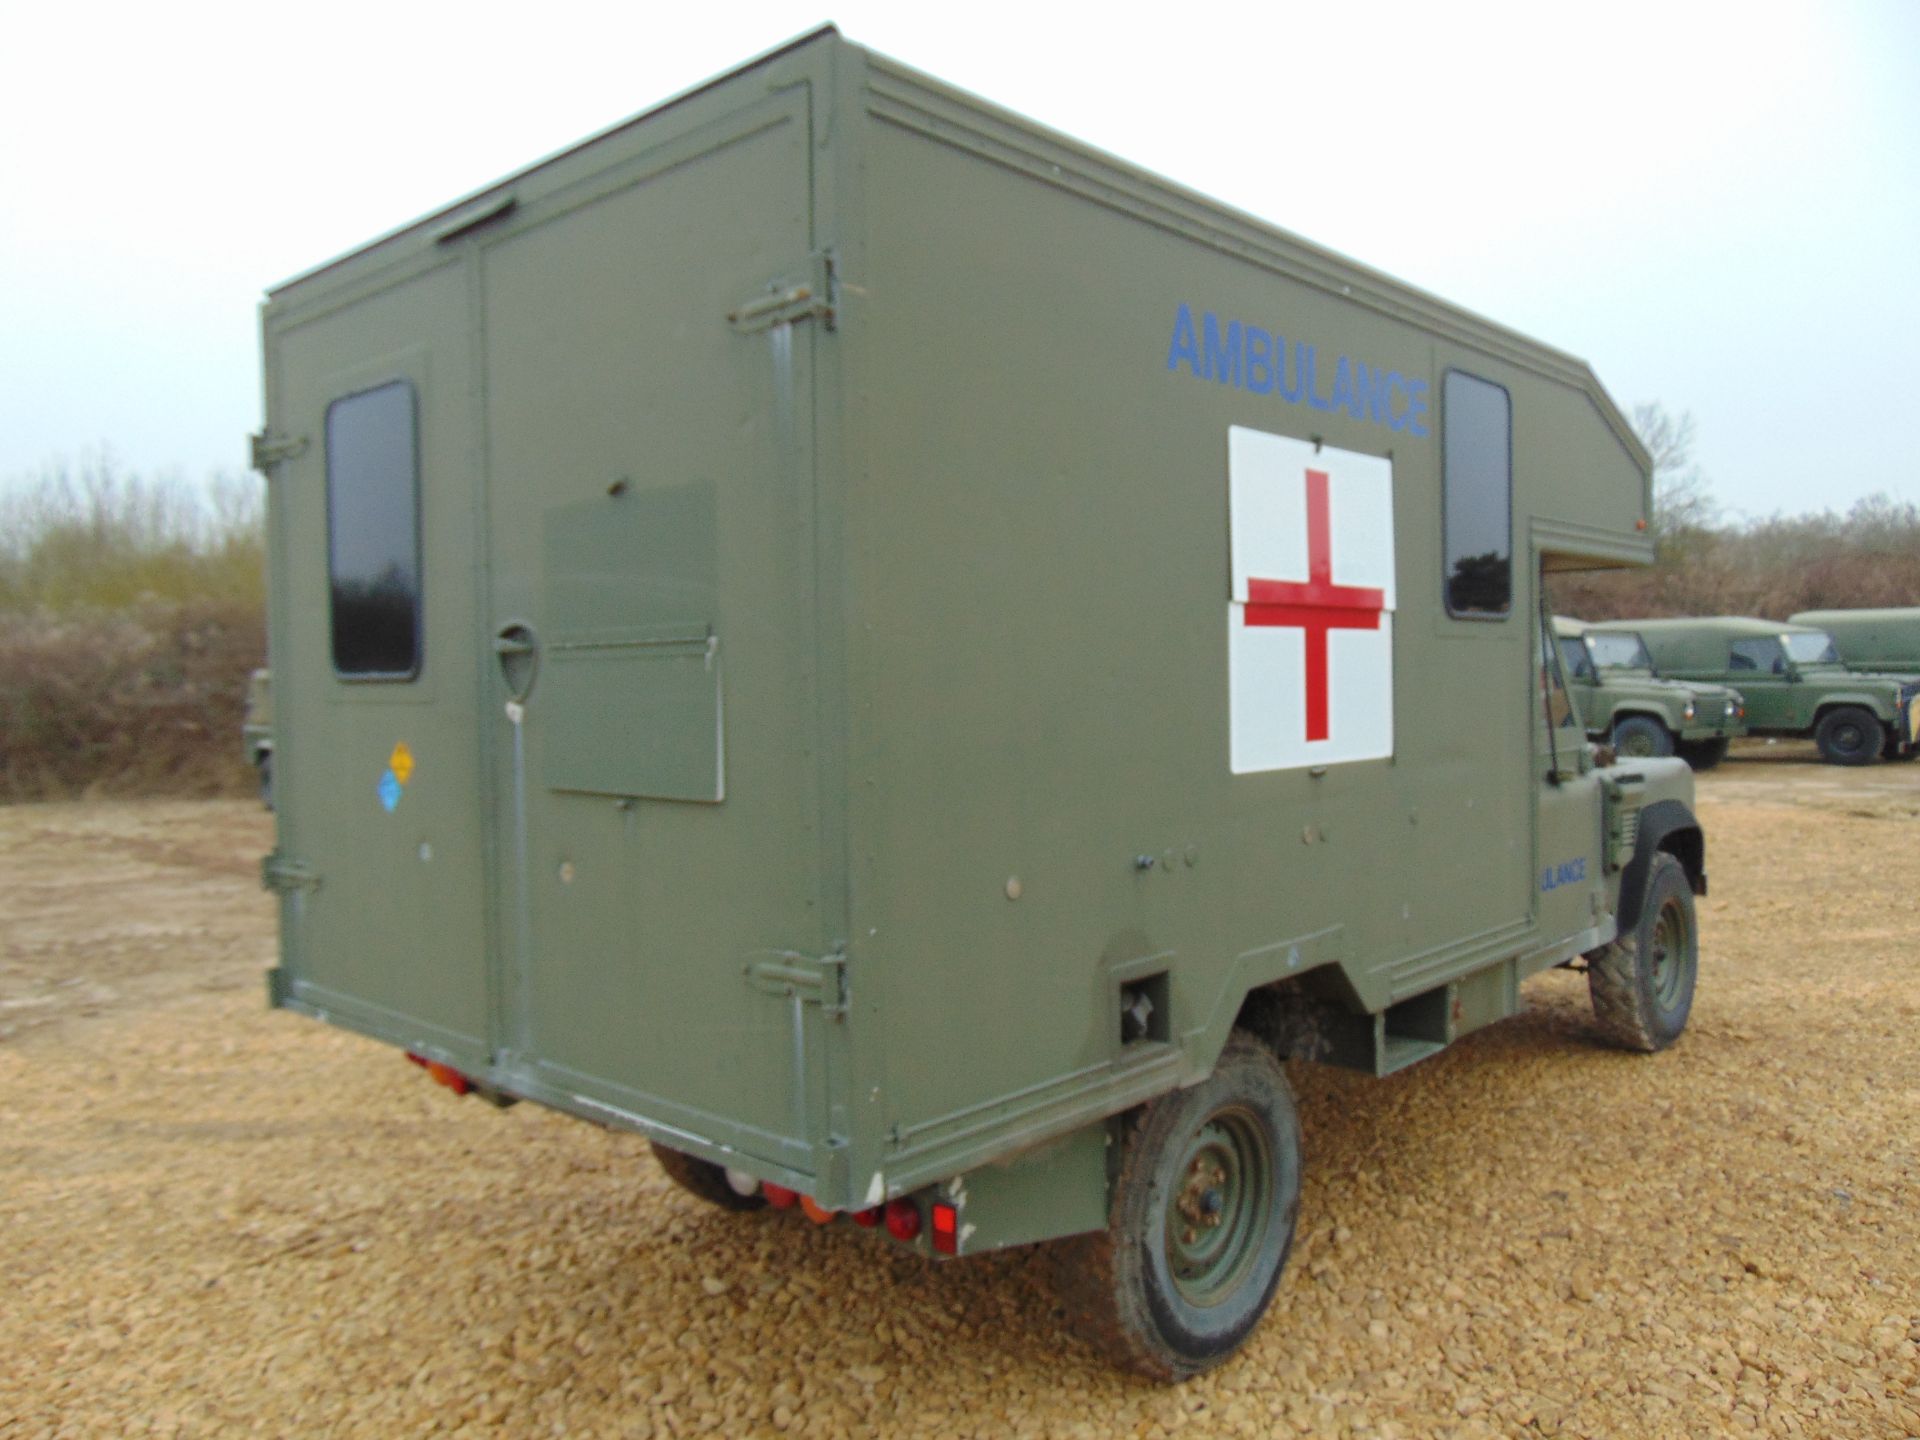 Military Specification Land Rover Wolf 130 ambulance - Image 6 of 19